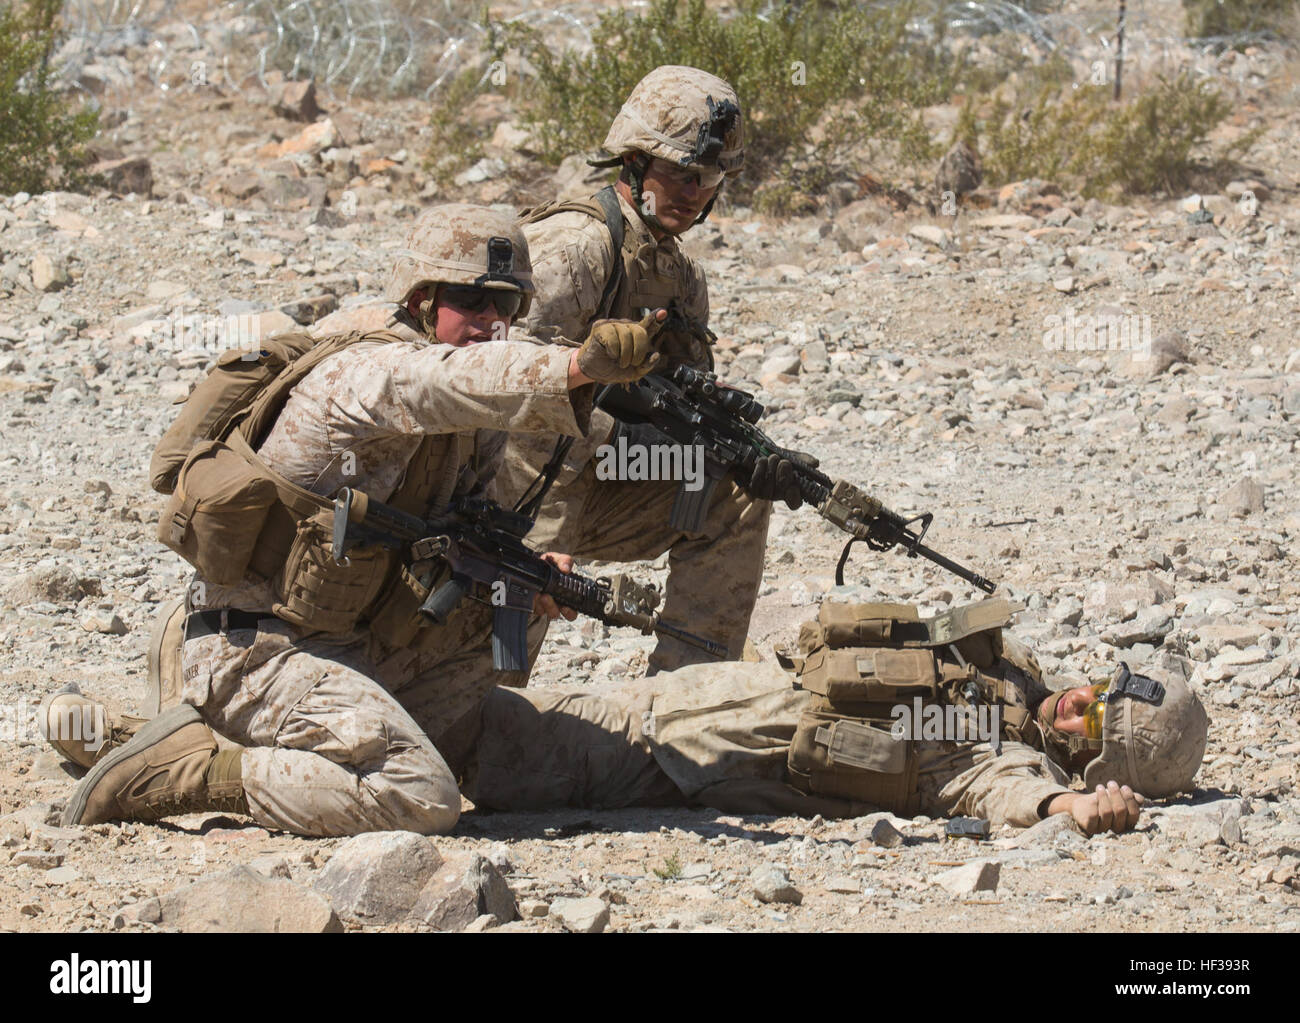 U.S. Marines with 3rd Battalion, 8th Marines, 2nd Marine Division (MARDIV), engage in a platoon attack drill during Integrated Training Exercise (ITX) 3-15 at Marine Corps Air Ground Combat Center Twentynine Palms, Calif., May 2, 2015. 6th Marines and subordinate units participated in ITX 3-15 to ensure all elements of Special-Purpose Marine Air Ground Task Force 6 are prepared for upcoming deployments and operational commitments. (U.S. Marine Corps photo by Staff Sgt. Keonaona C. Paulo 2D MARDIV Combat Camera/Released) ITX 3-15 150502-M-EF955-226 Stock Photo